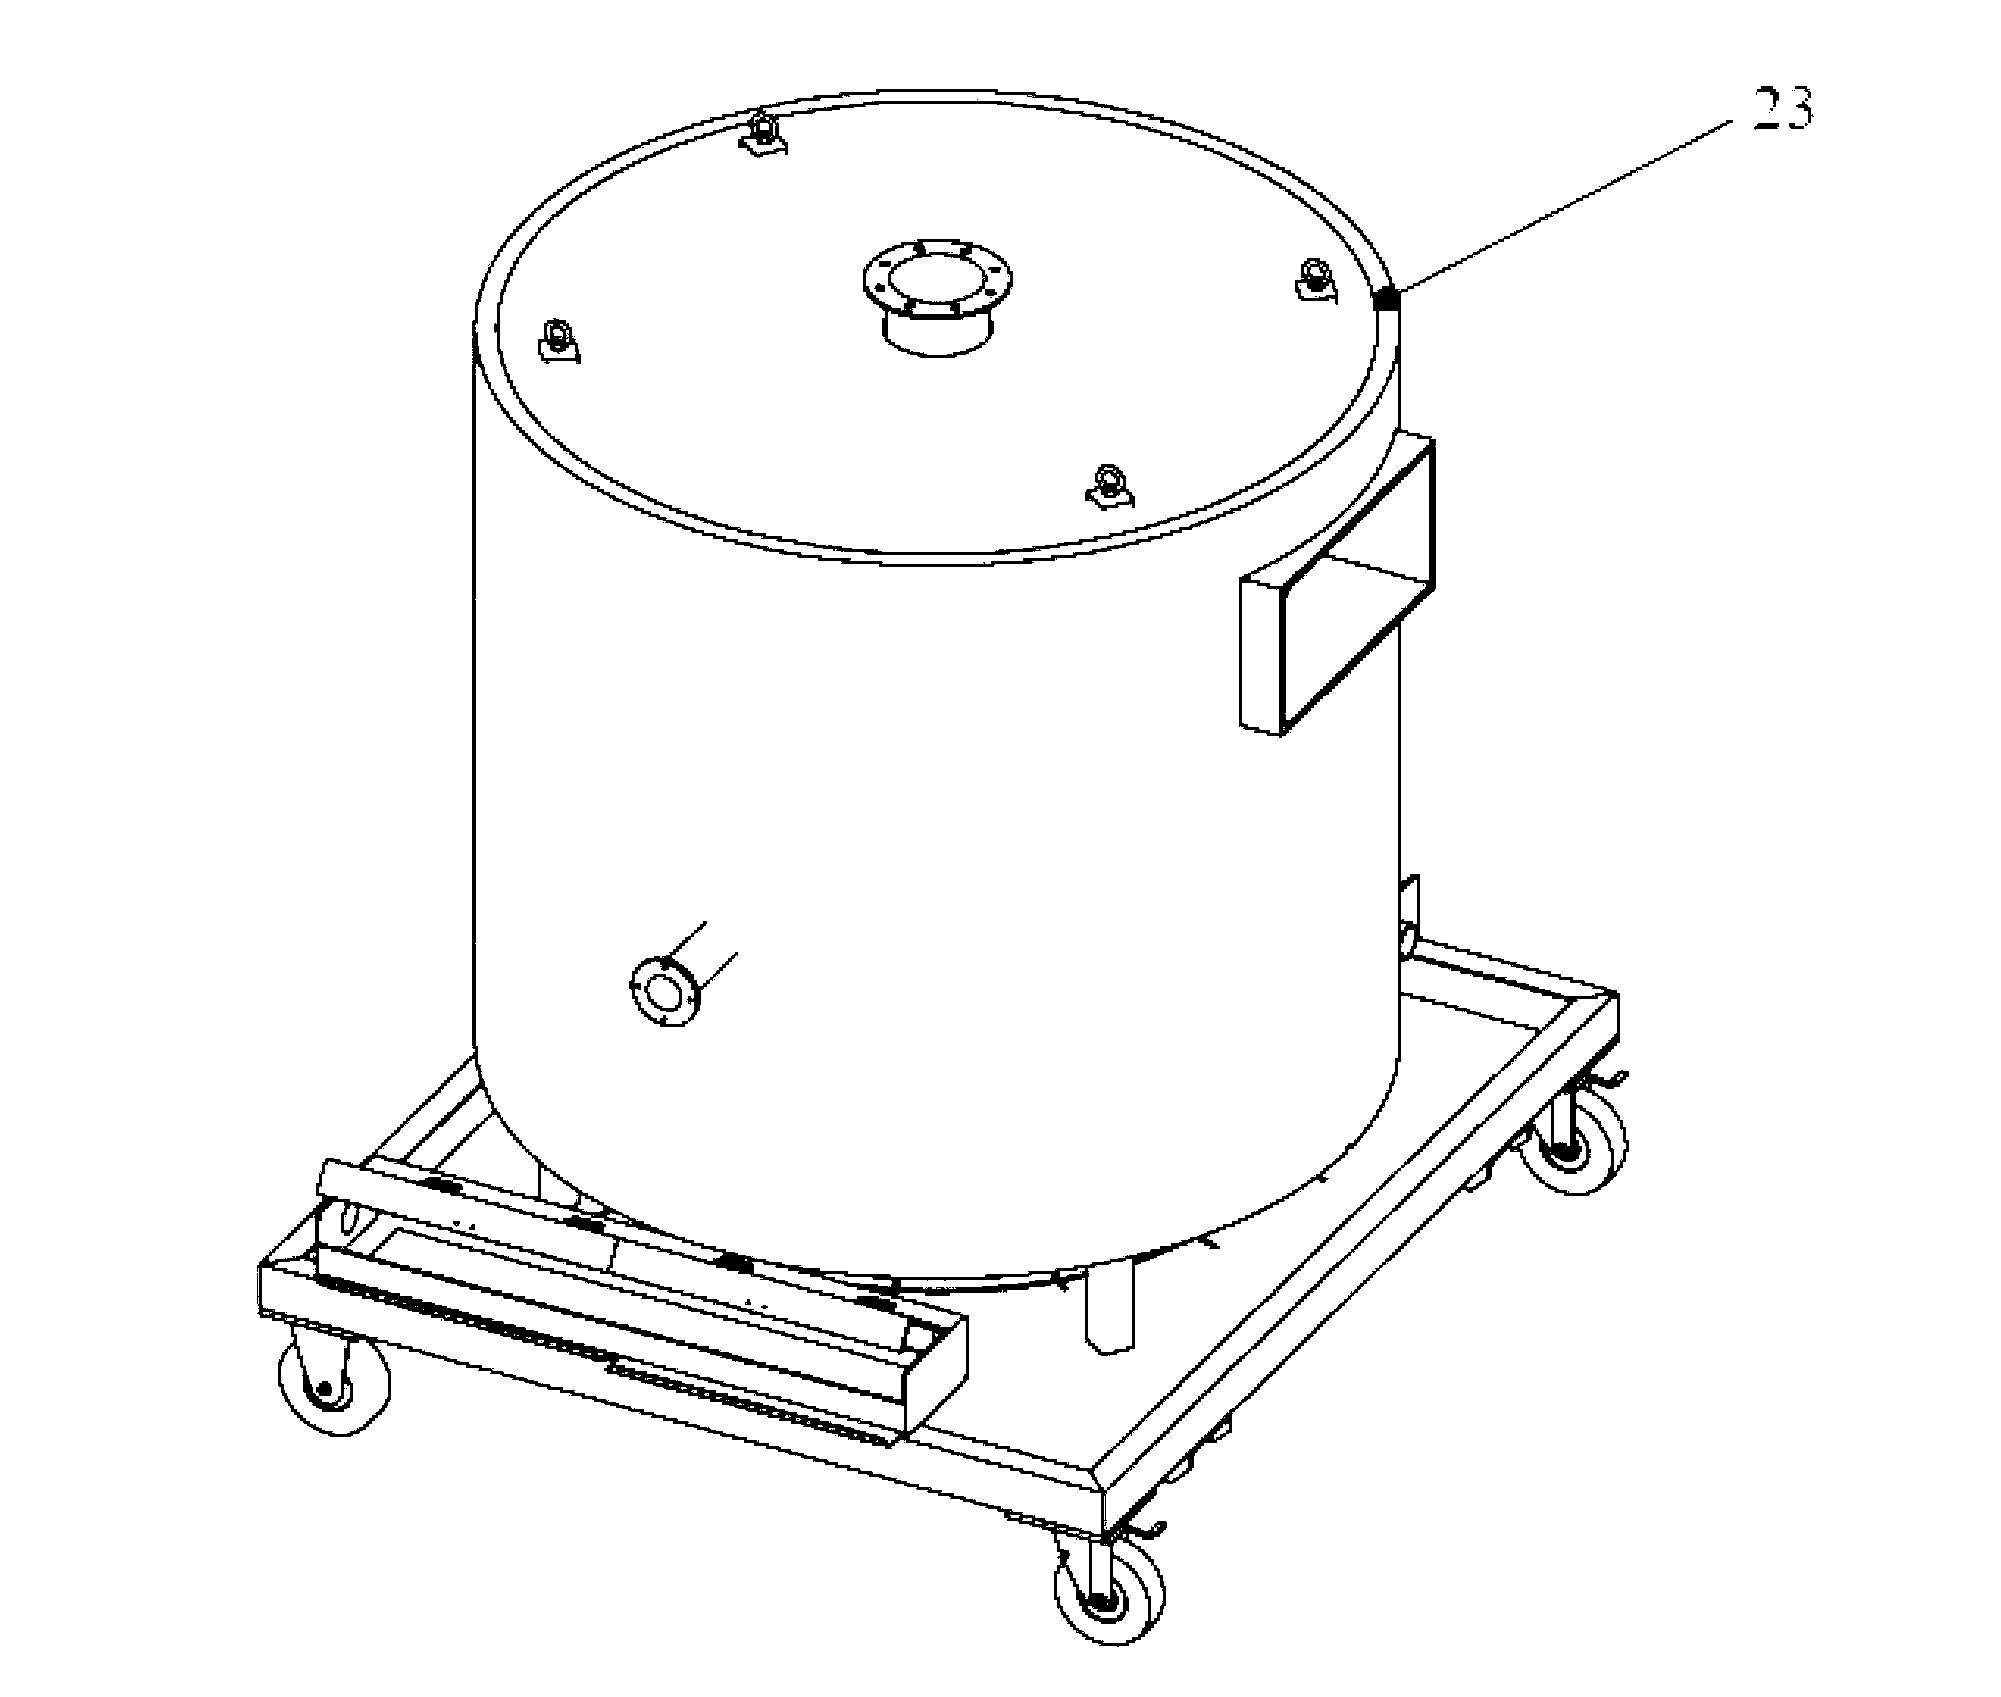 Garbage decomposition processing device